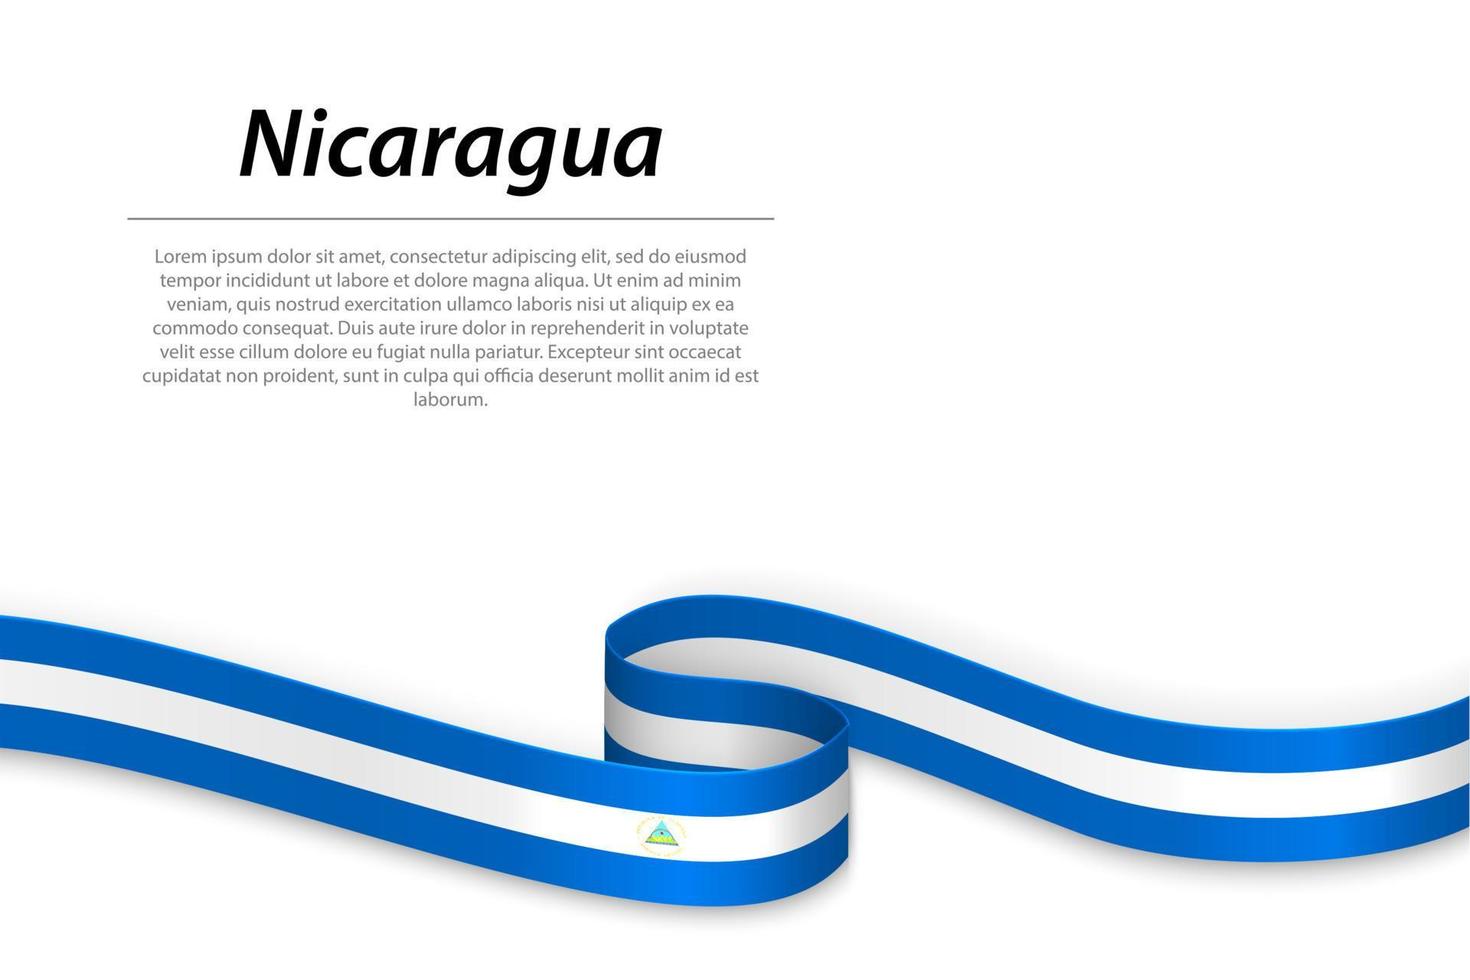 Waving ribbon or banner with flag of Nicaragua vector